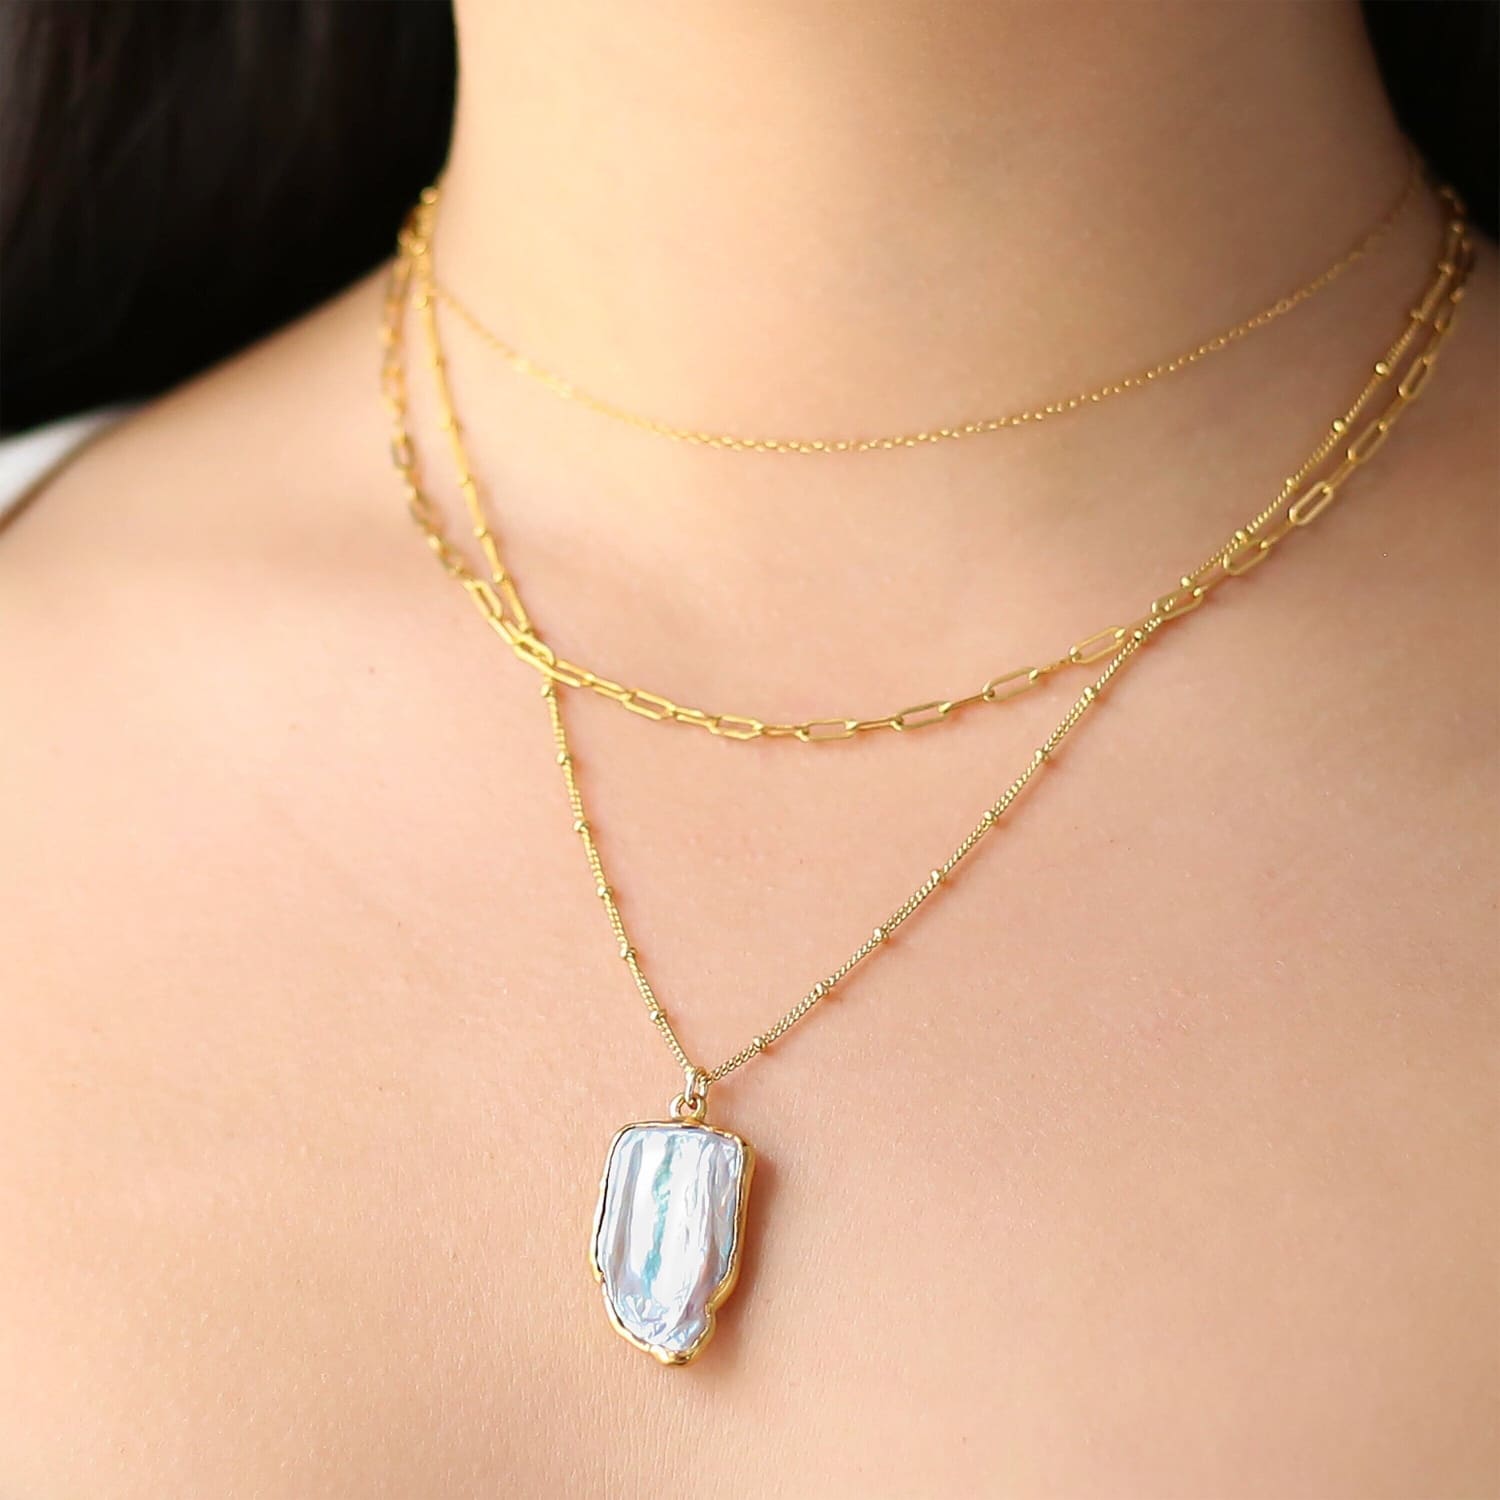 Buy Dainty Coin Pendant 14K Gold Layered Necklace Whit Star Long Chain  Multilayer Necklace Set Jewelry for Women Lady Girls Gift Jewelry at  Amazon.in